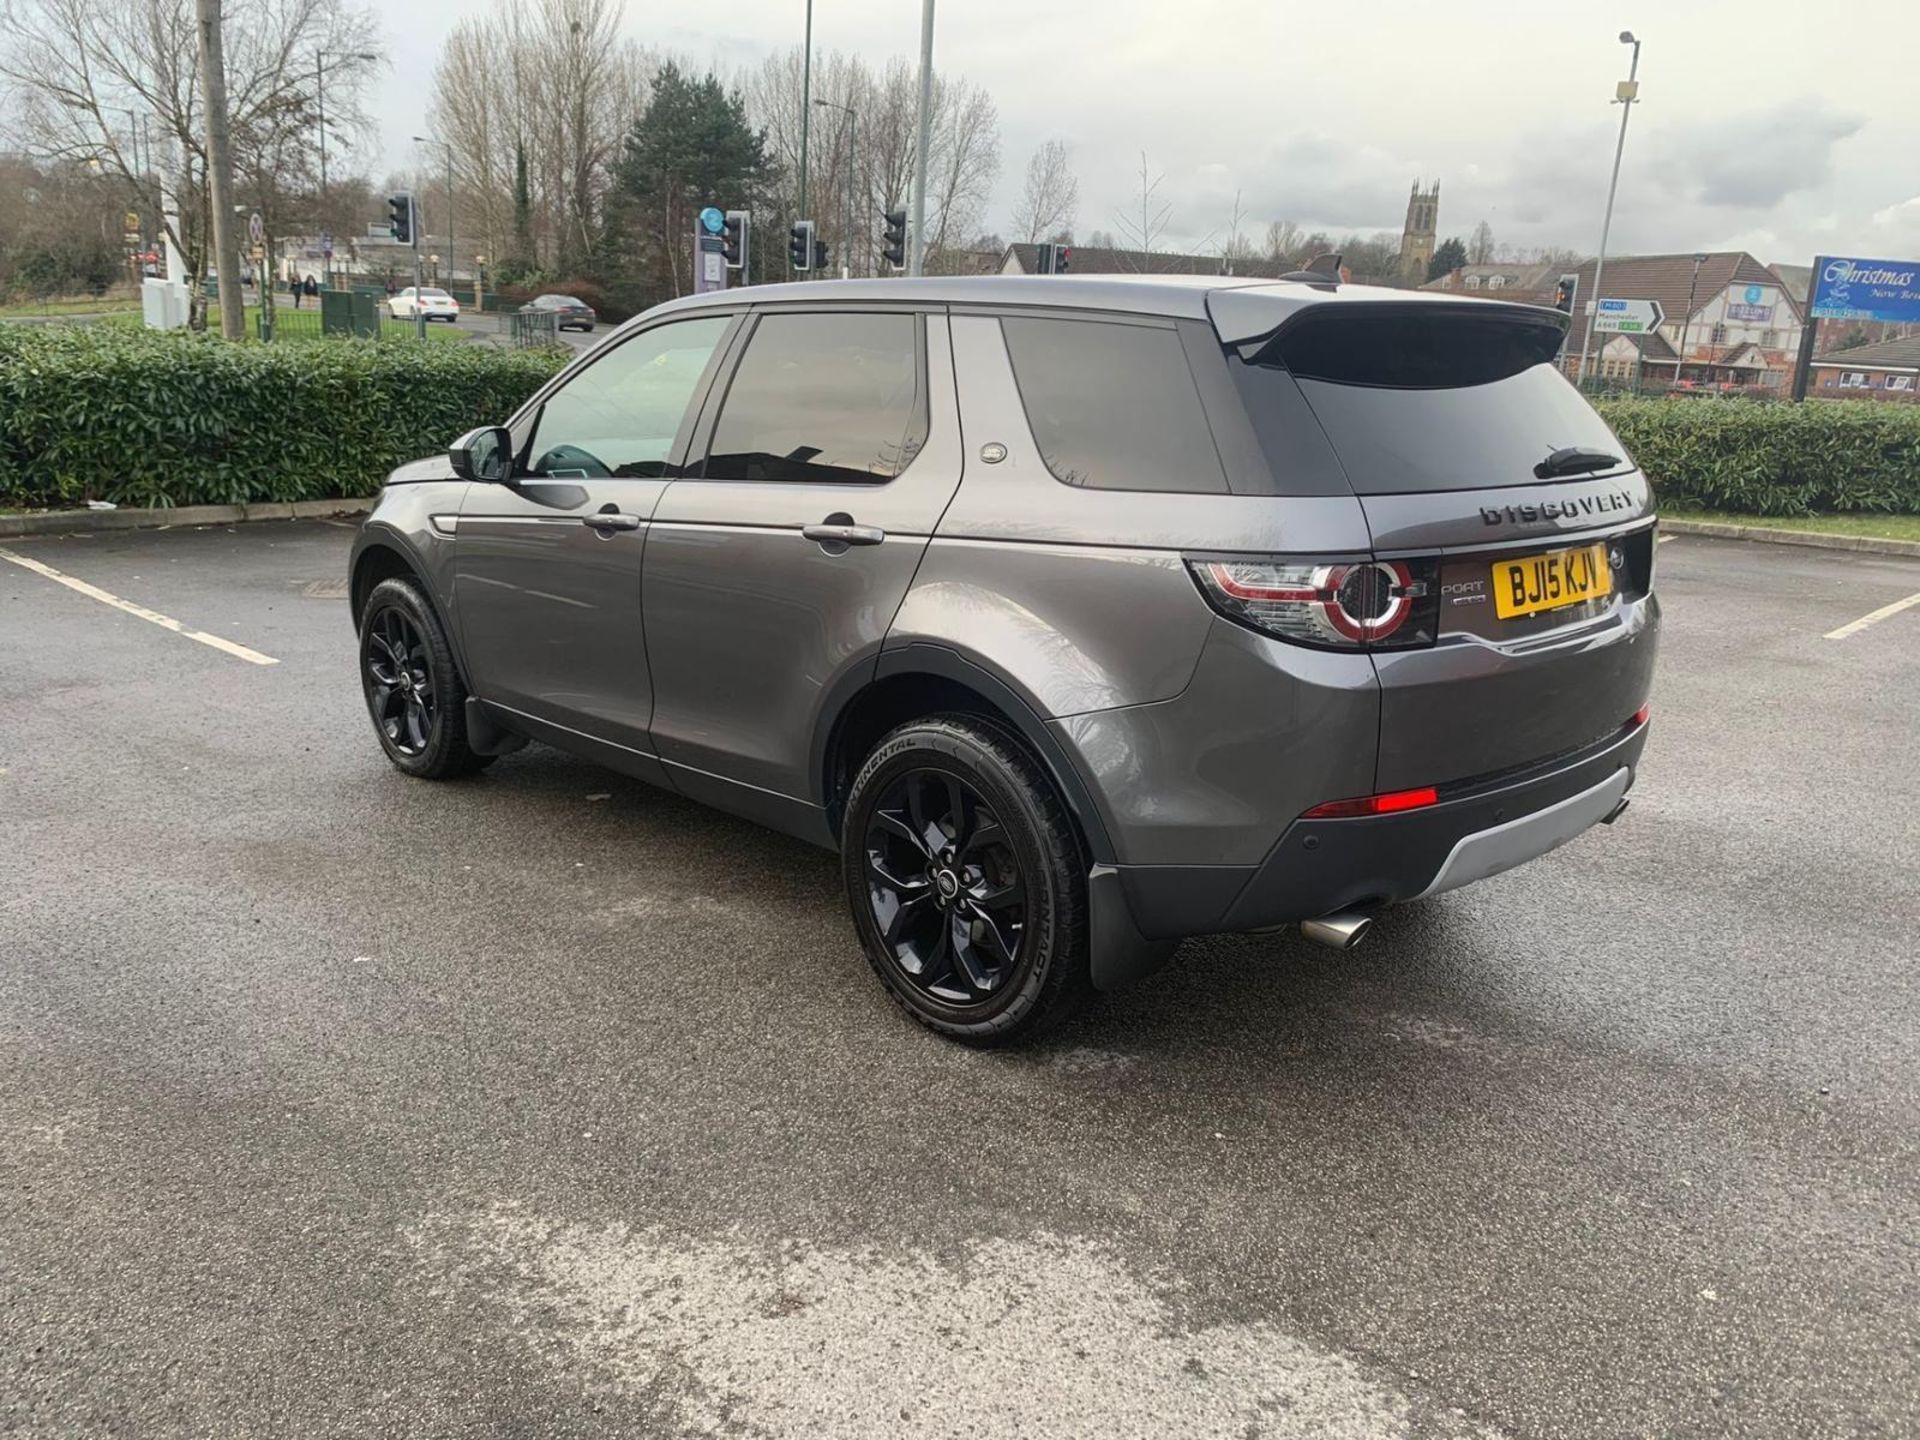 2015 LAND ROVER DISCOVERY SPORT 2.2 SD4 HSE 5DR AUTO ESTATE DIESEL AUTOMATIC - Image 5 of 12